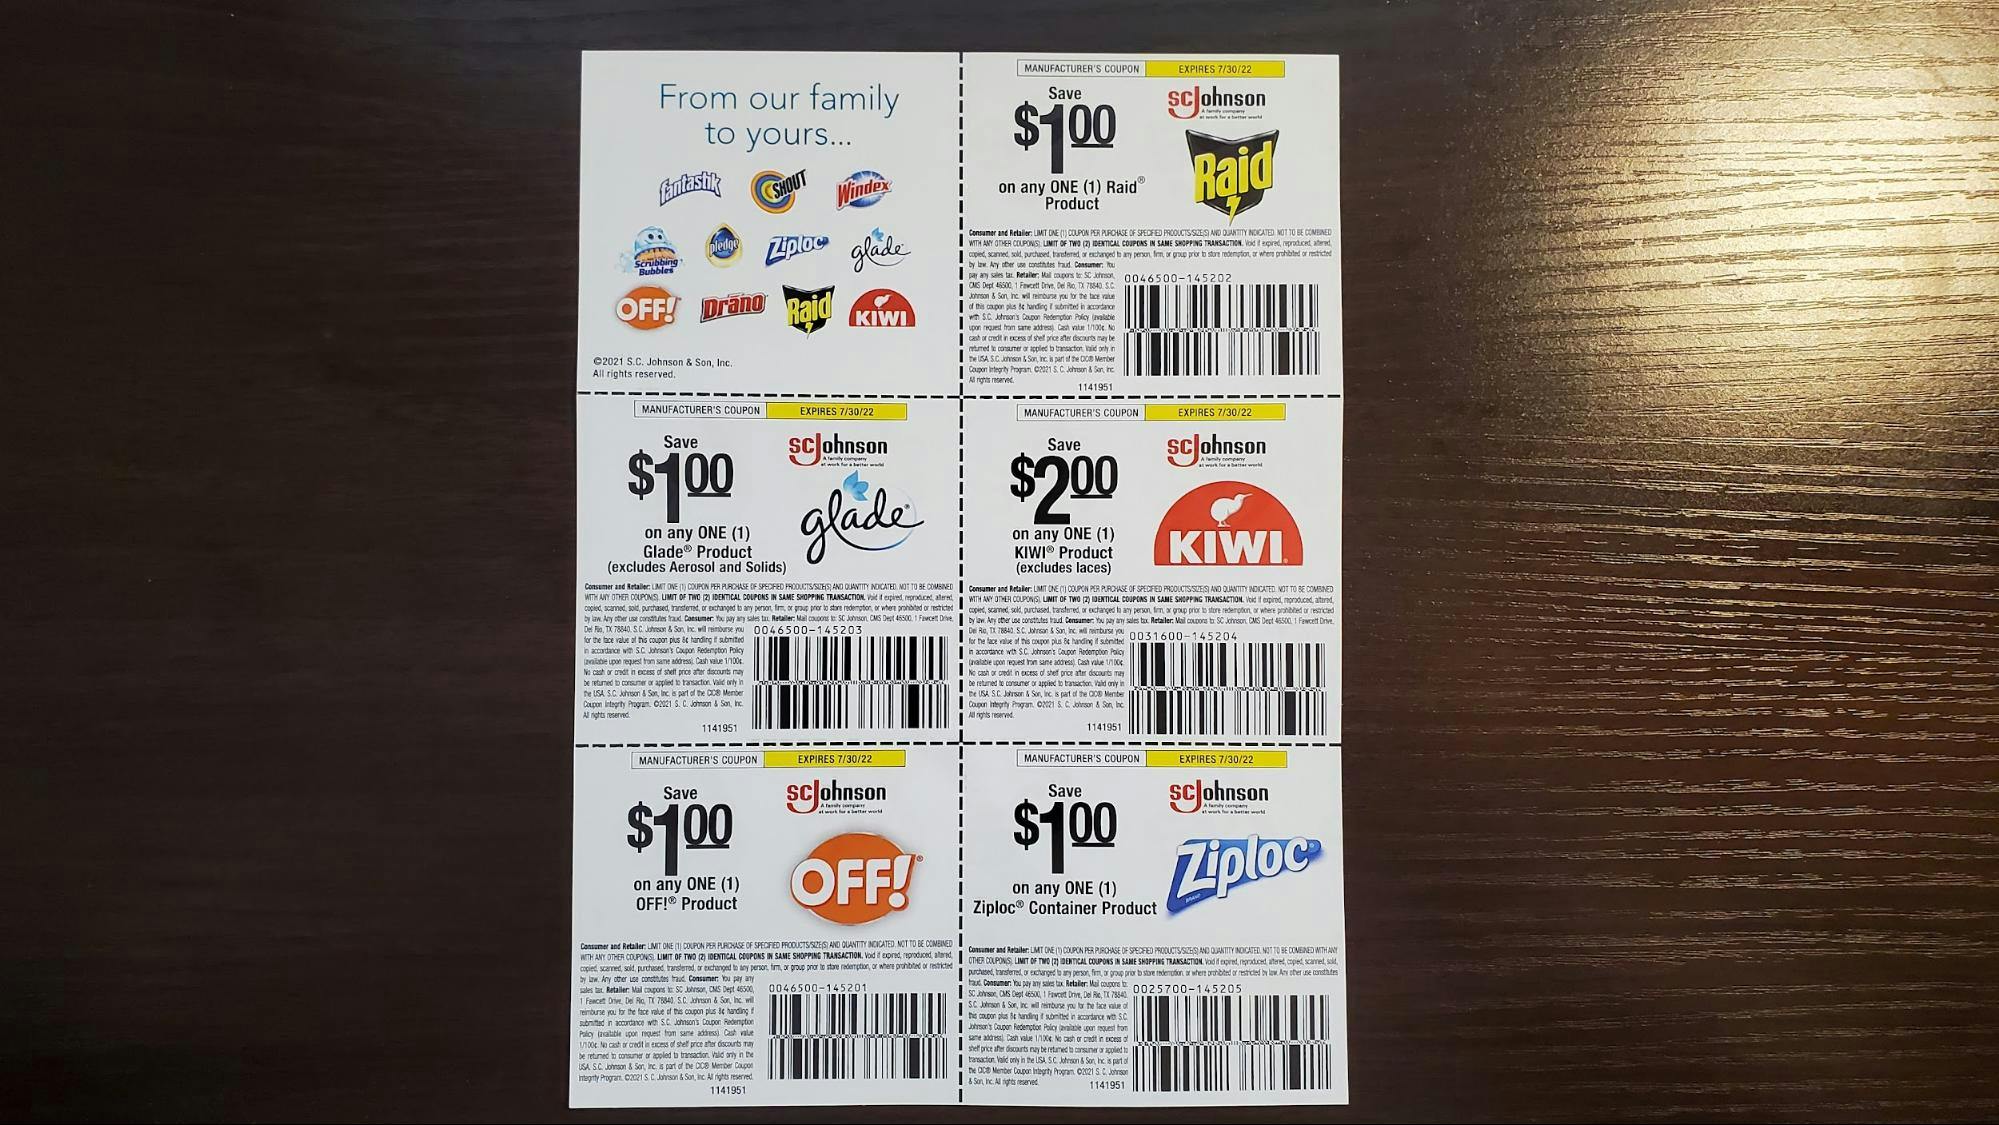 Free SC Johnson coupons by mail